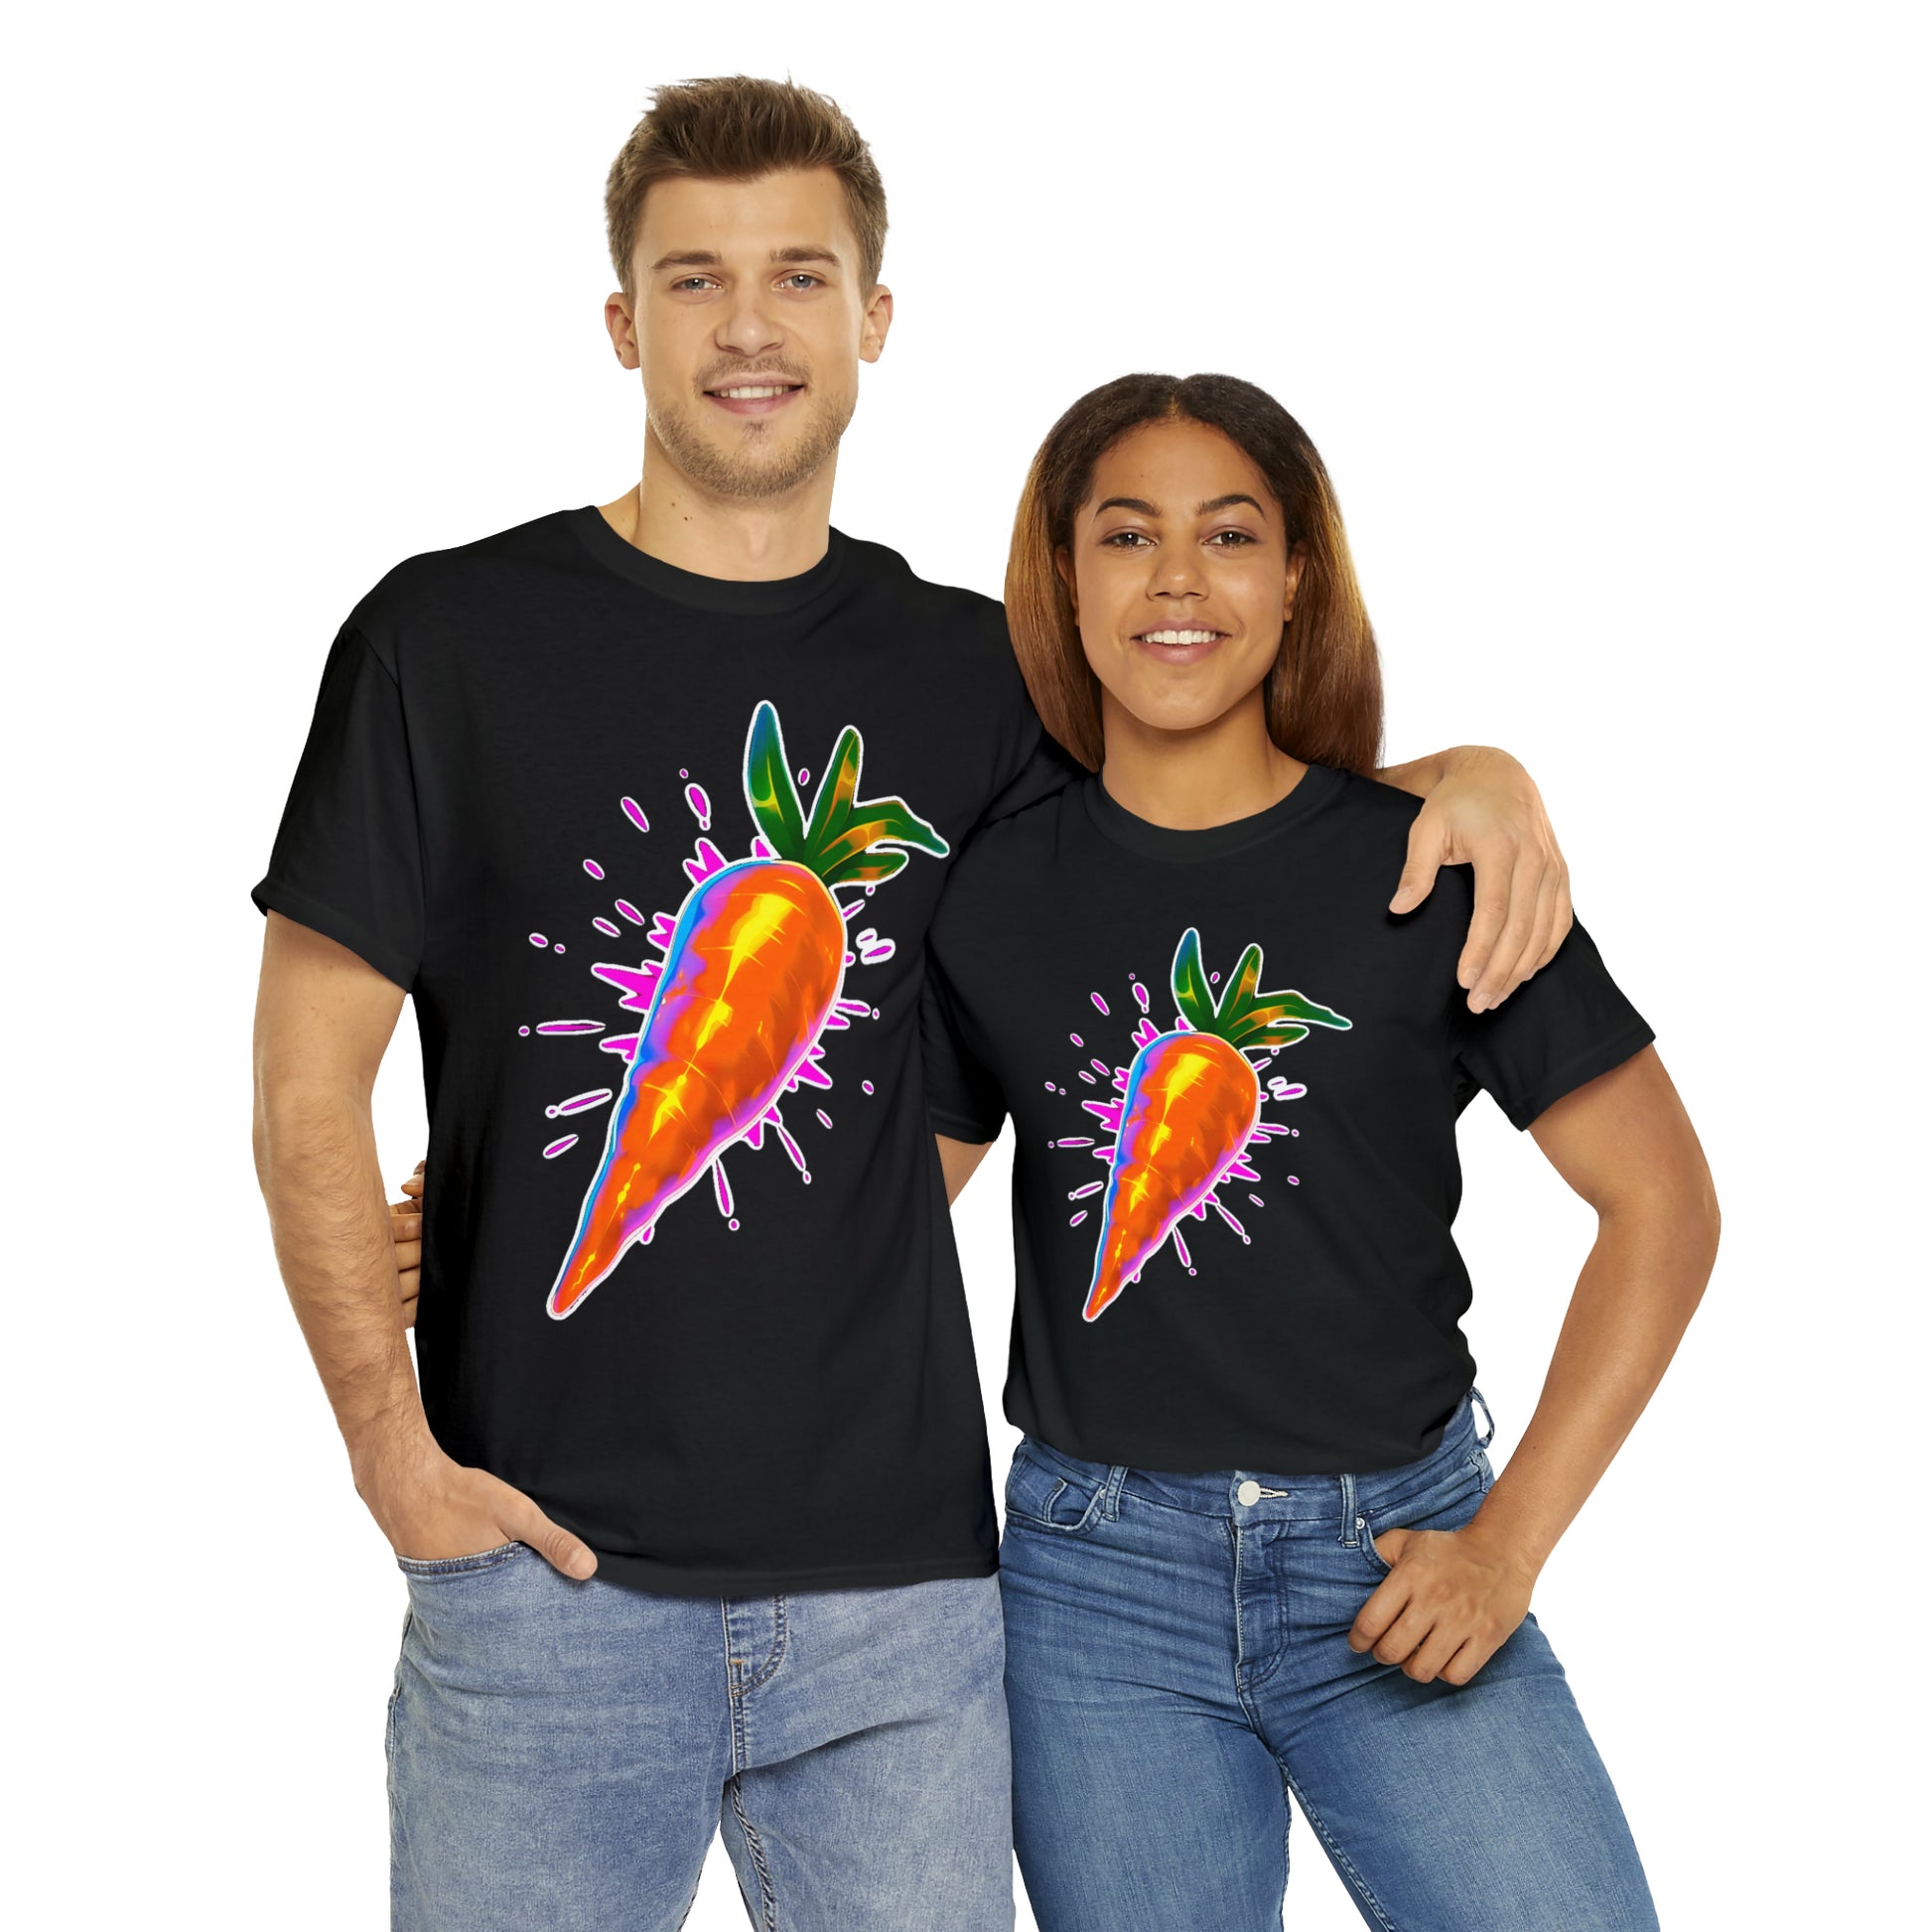 Magic Carrot Illustration Tee Shirt, Black, Royal Blue, Red, and Navy T-Shirts, Model Mockups on a White background, Awesome Designs by Zeesdesign, Free Shipping on orders over $50